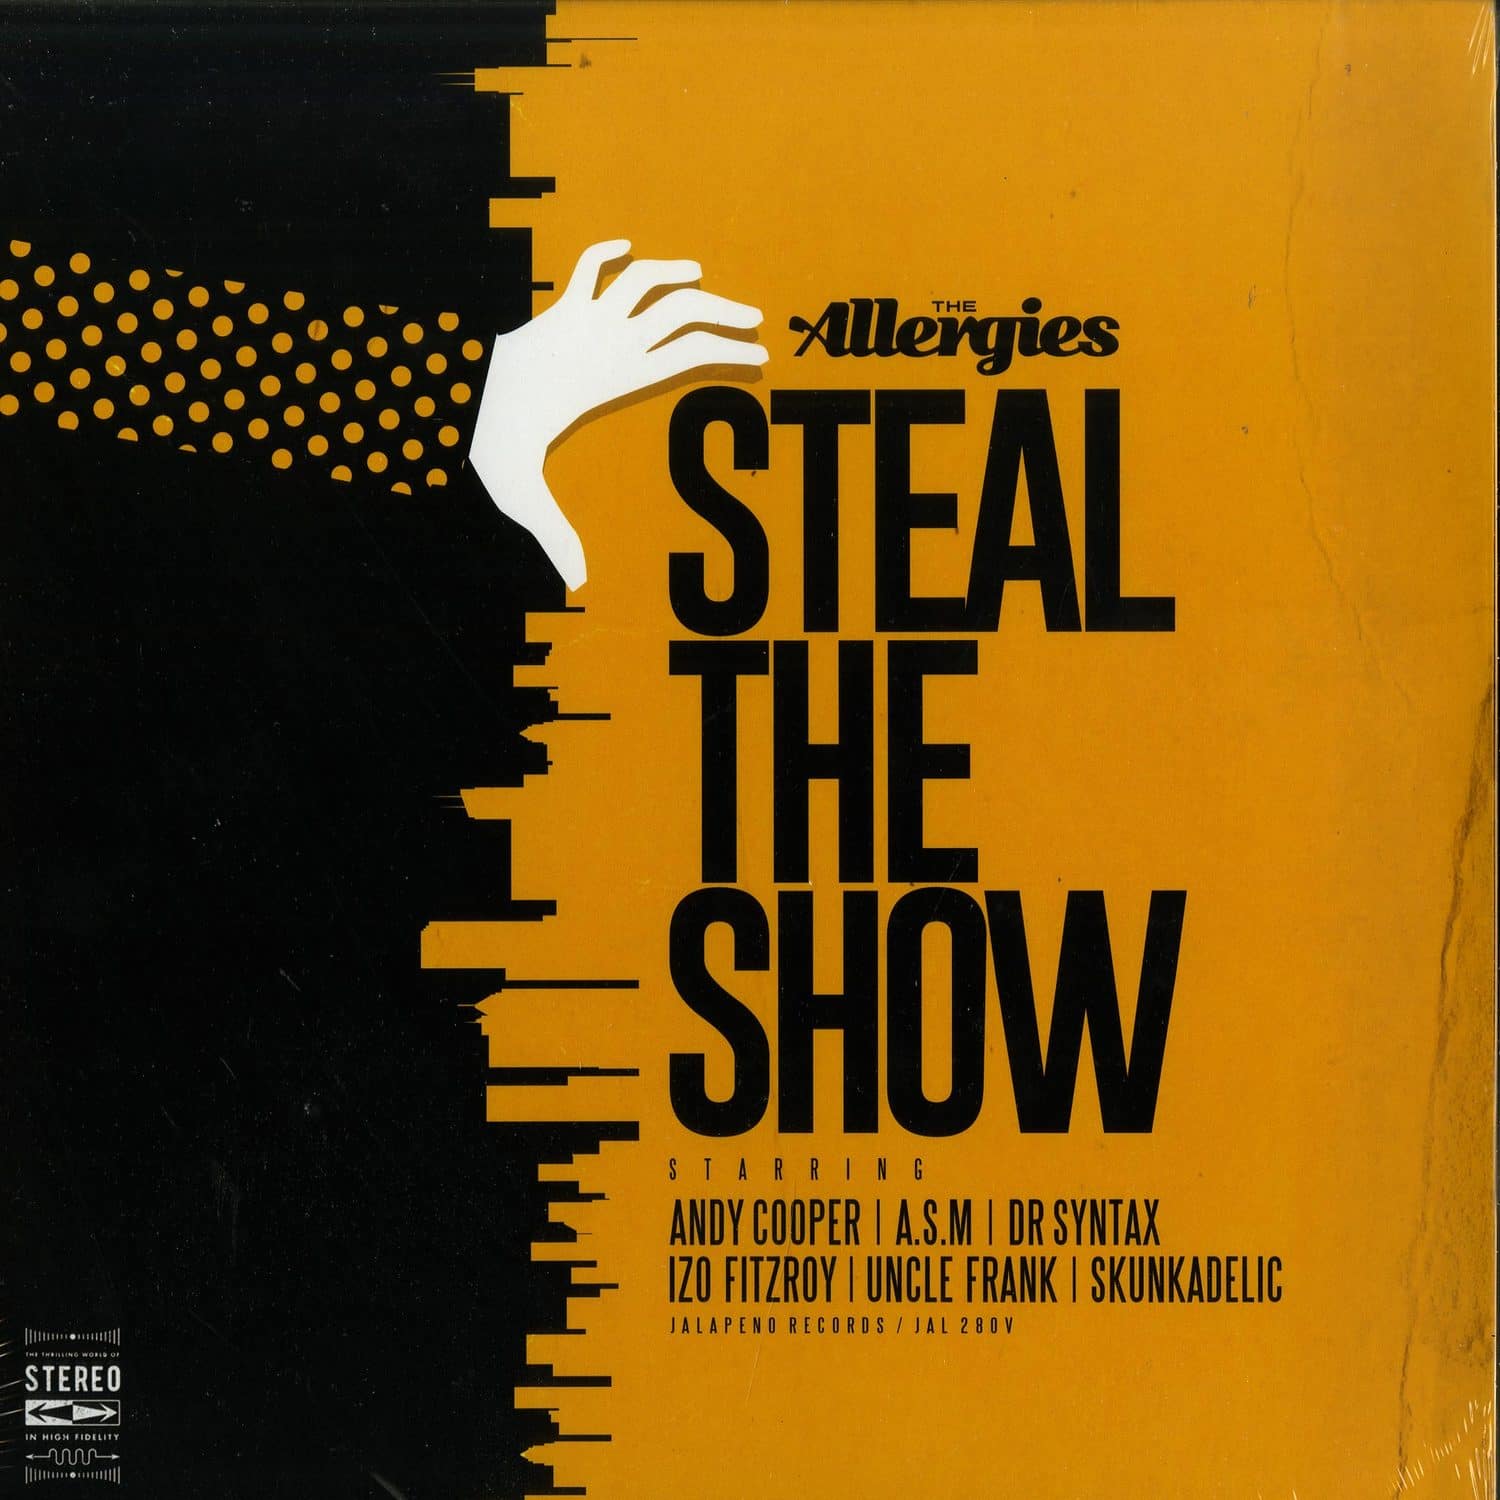 The Allergies - STEAL THE SHOW 